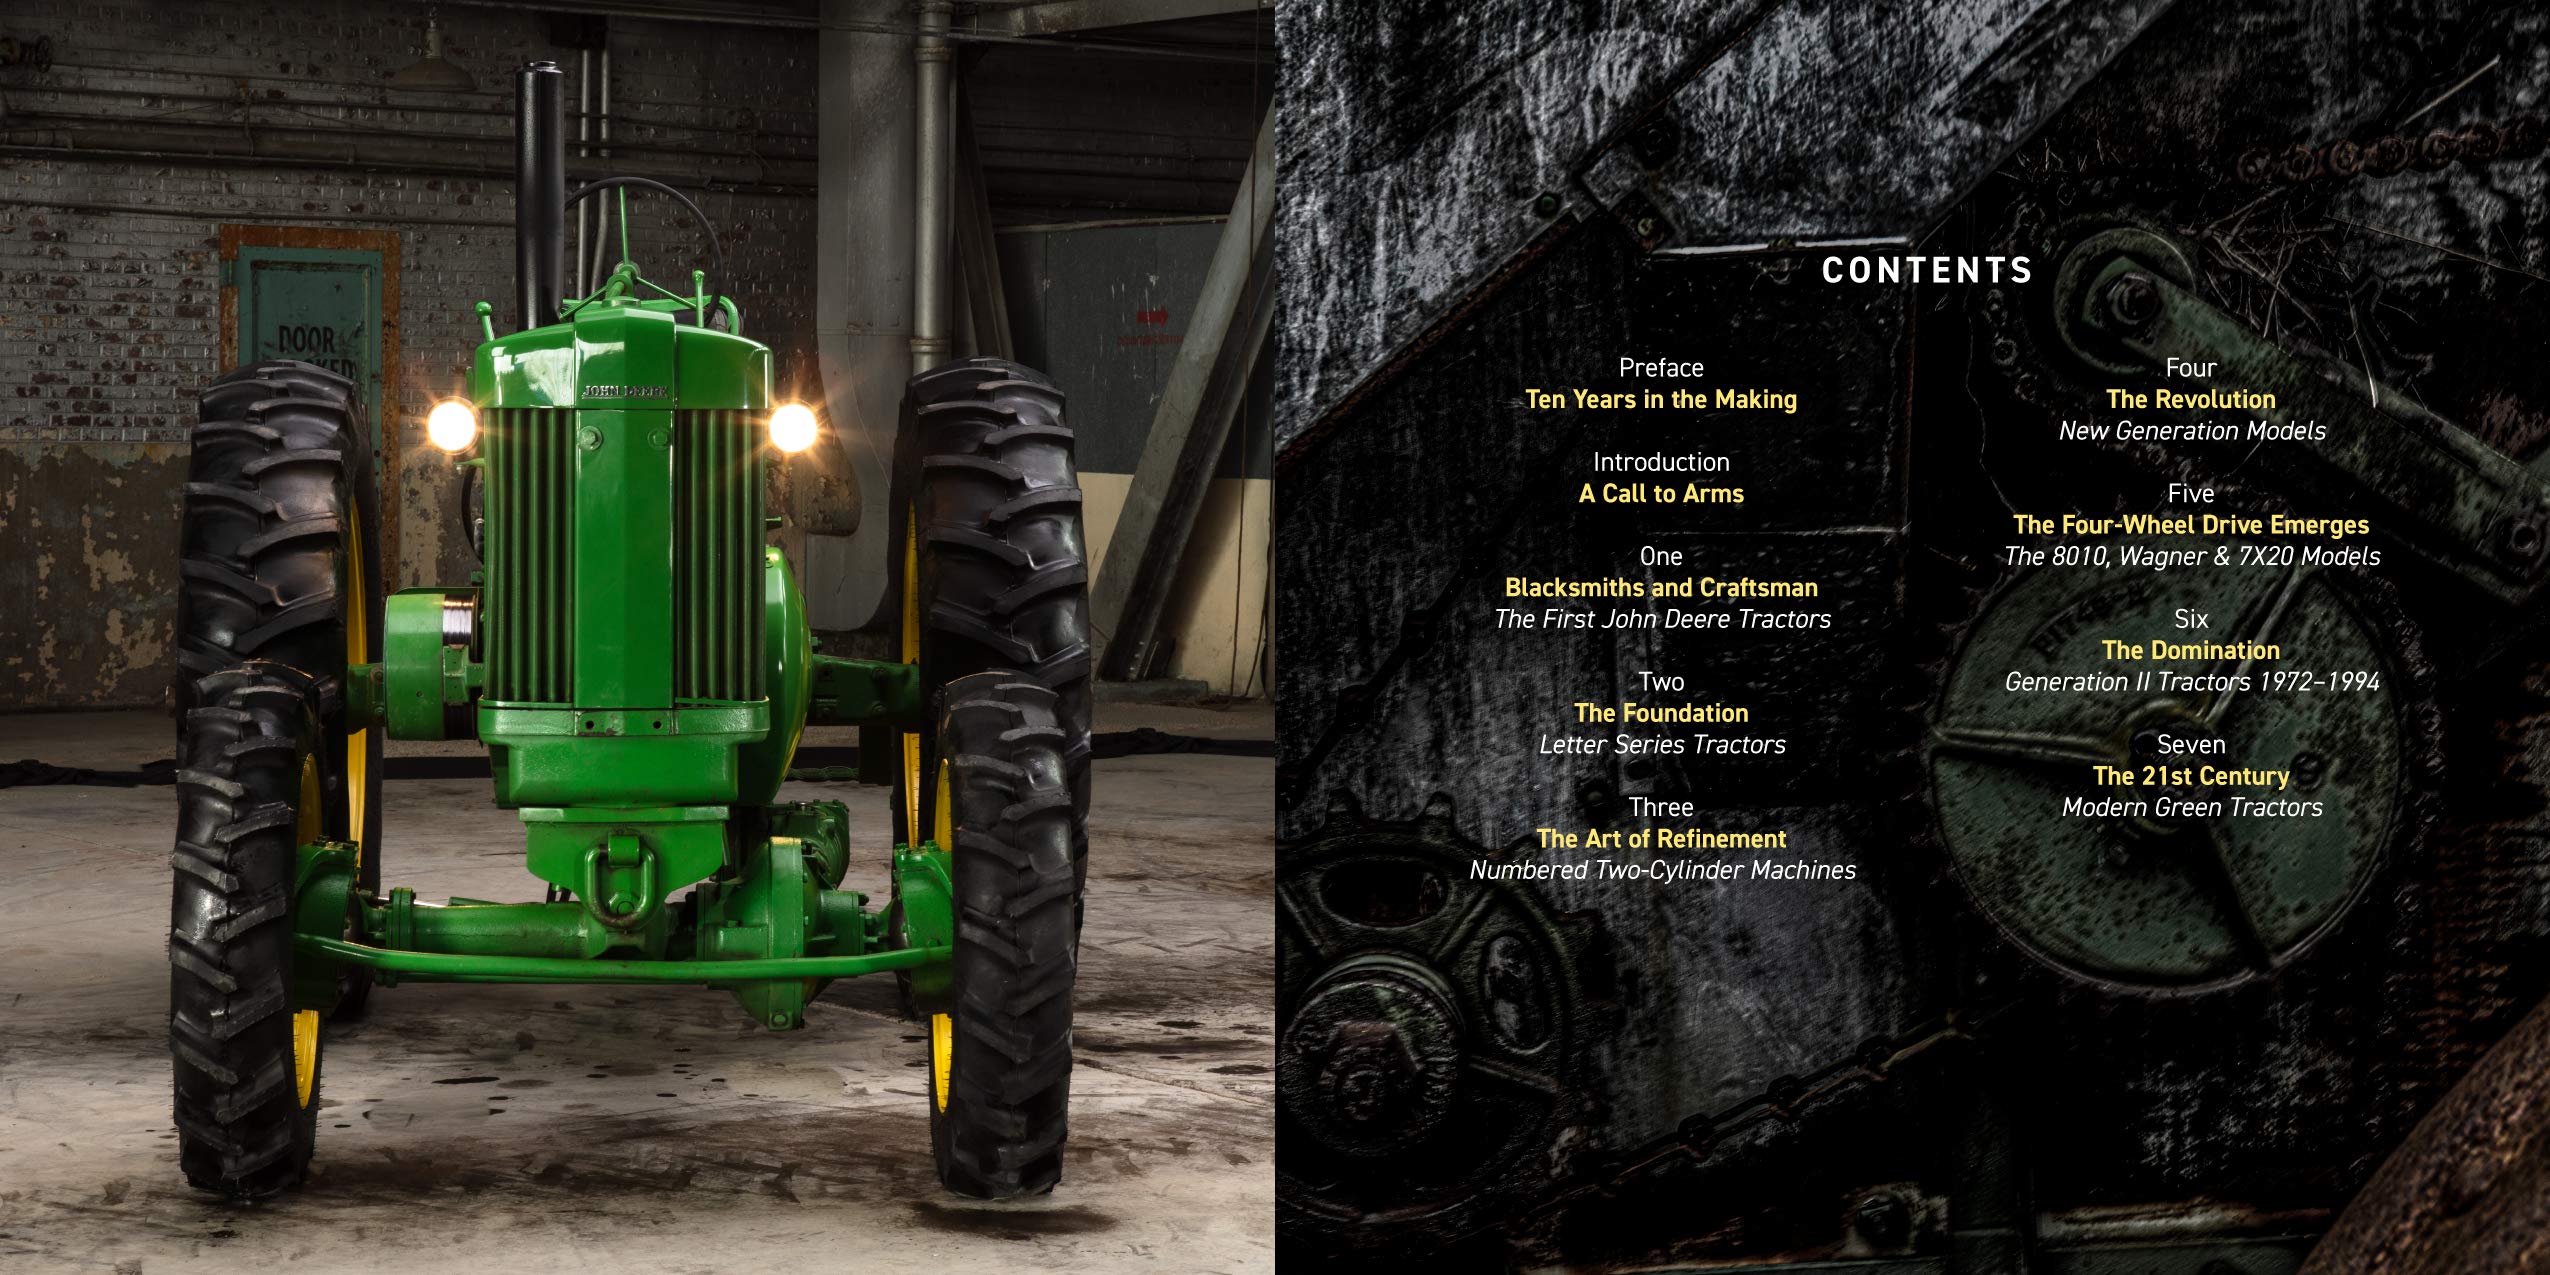 John Deere Evolution: The Design and Engineering of an American Icon